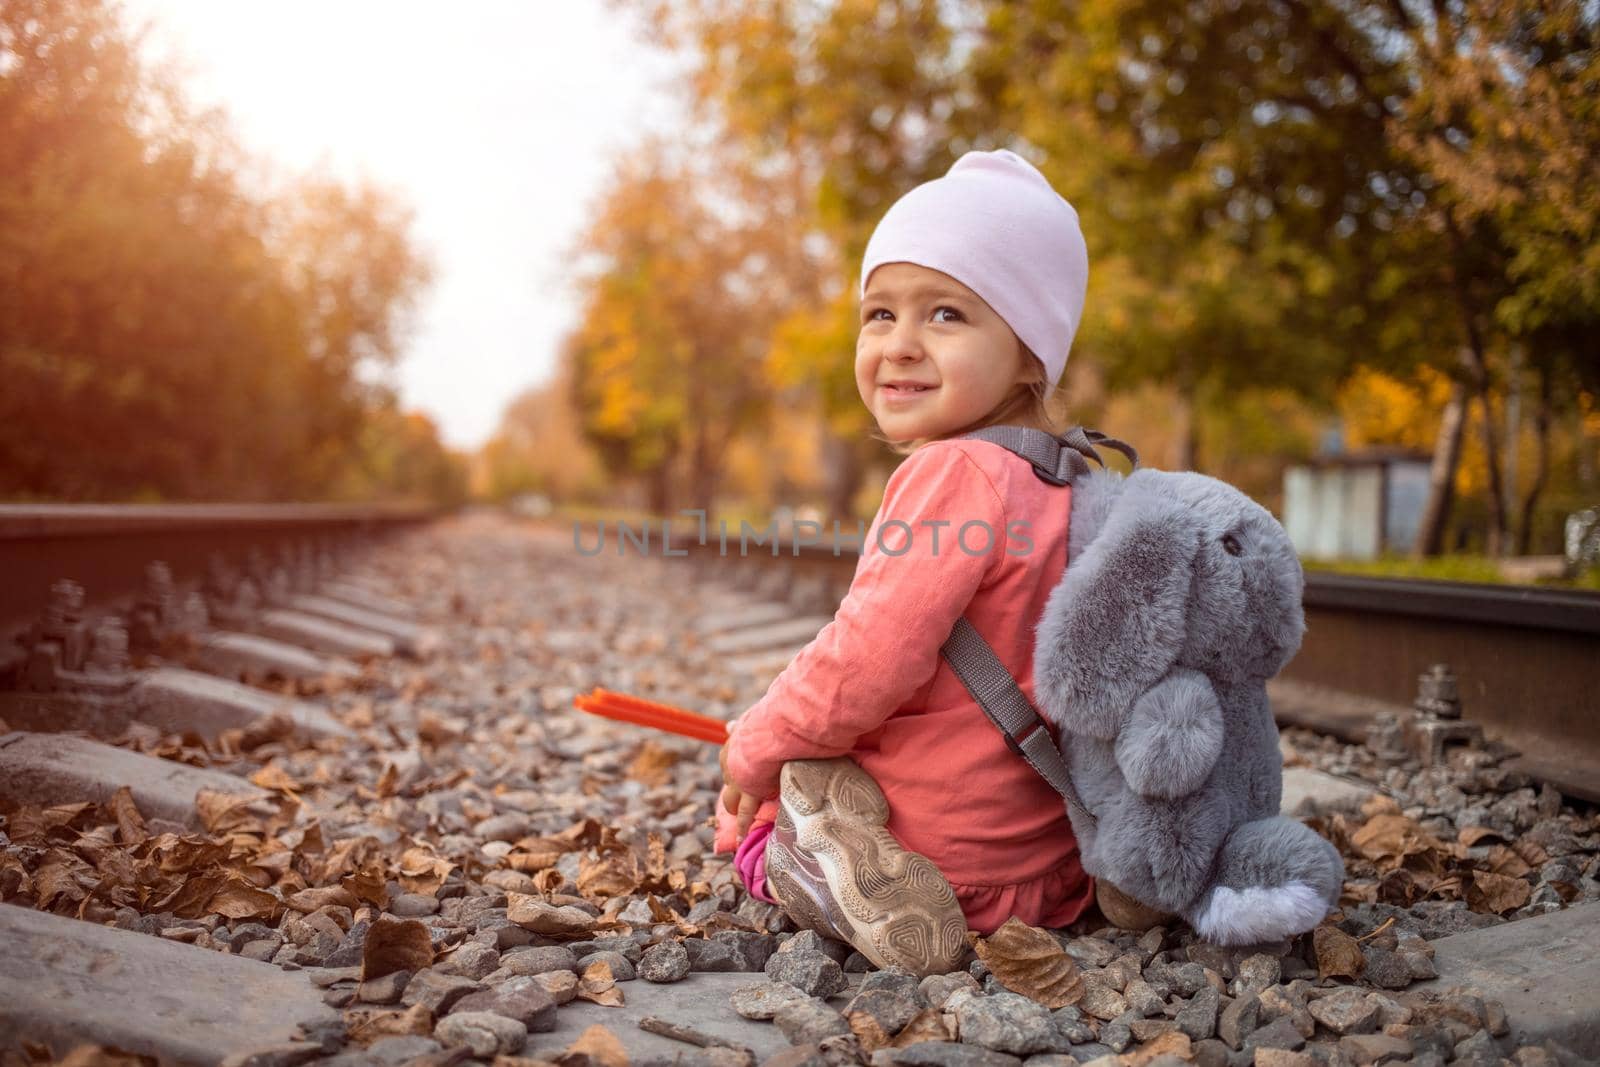 children in danger concept. a cheerful girl sits on the railroad tracks and smiles slyly on sunny autumn day.